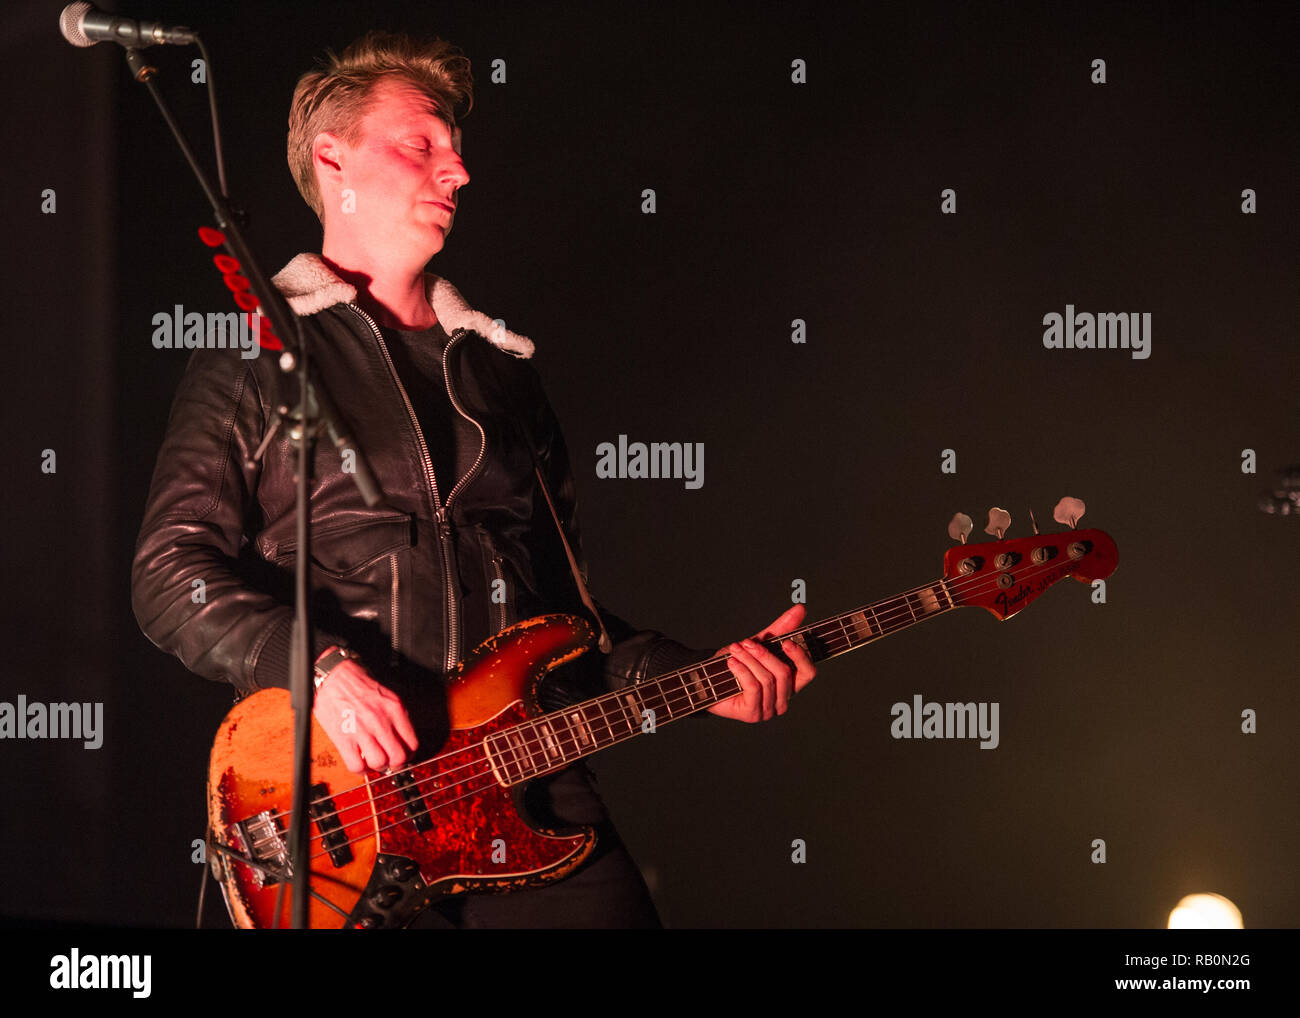 Bass Player - Dougie Payne from Fran Healy's band Travis performs at the SSE Hydro in Glasgow, UK. 21st December 2018 Stock Photo